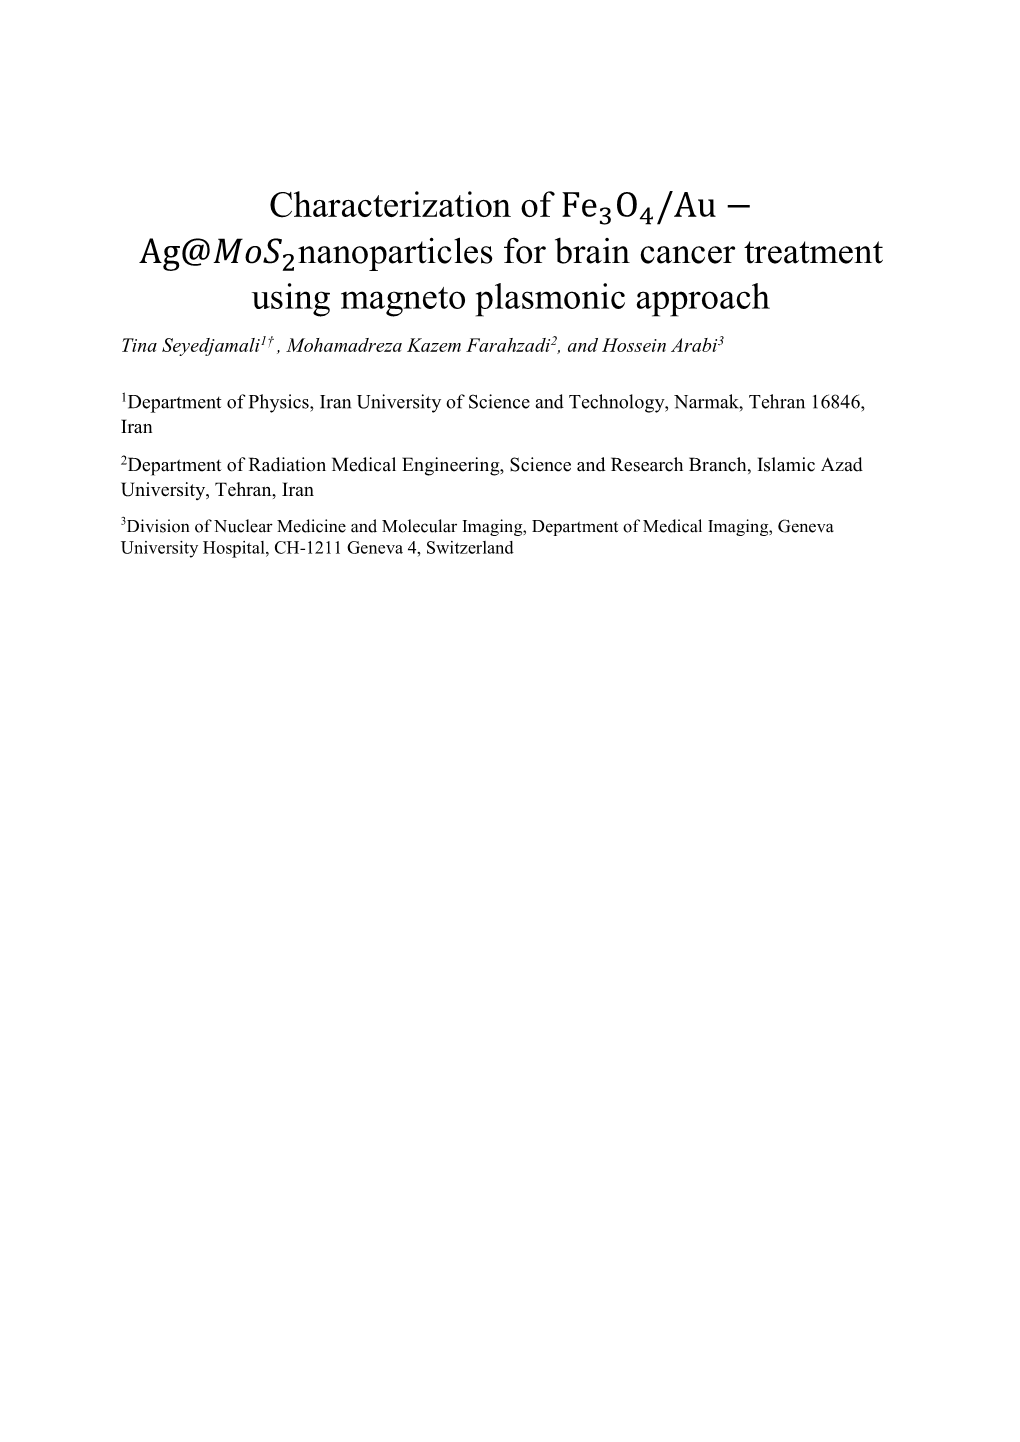 Characterization of Nanoparticles for Brain Cancer Treatment Using